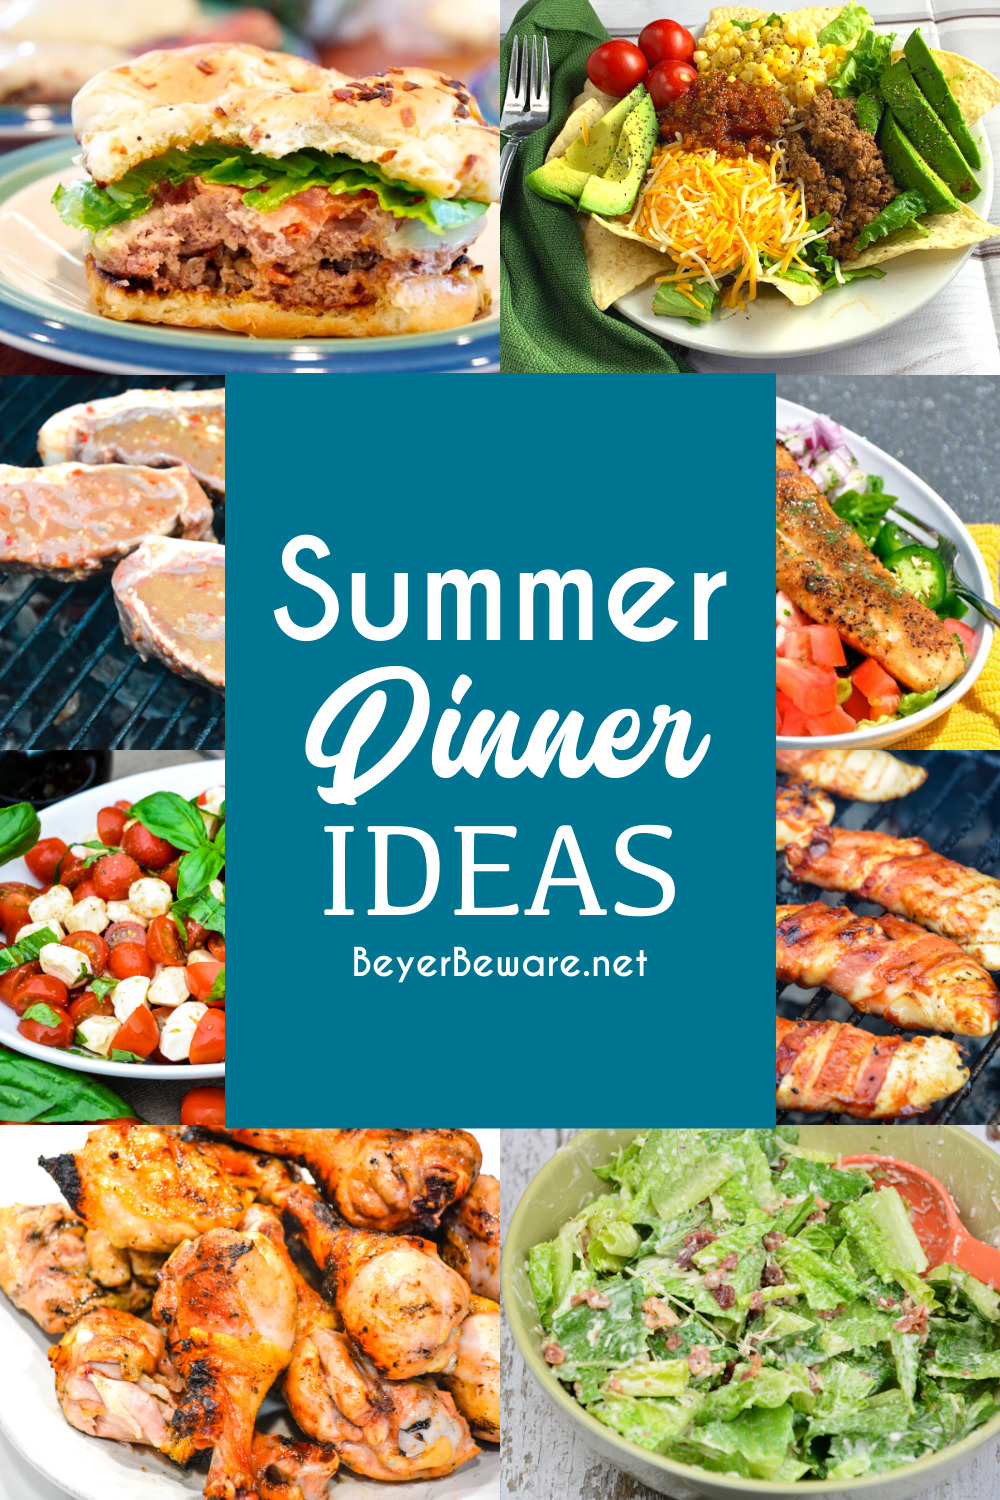 Summer dinner ideas that will keep your kitchen cool and your stomachs filled with everything from grilled chicken, steaks, and burgers to salads and garden-fresh recipes to accompany everything coming off the grill.